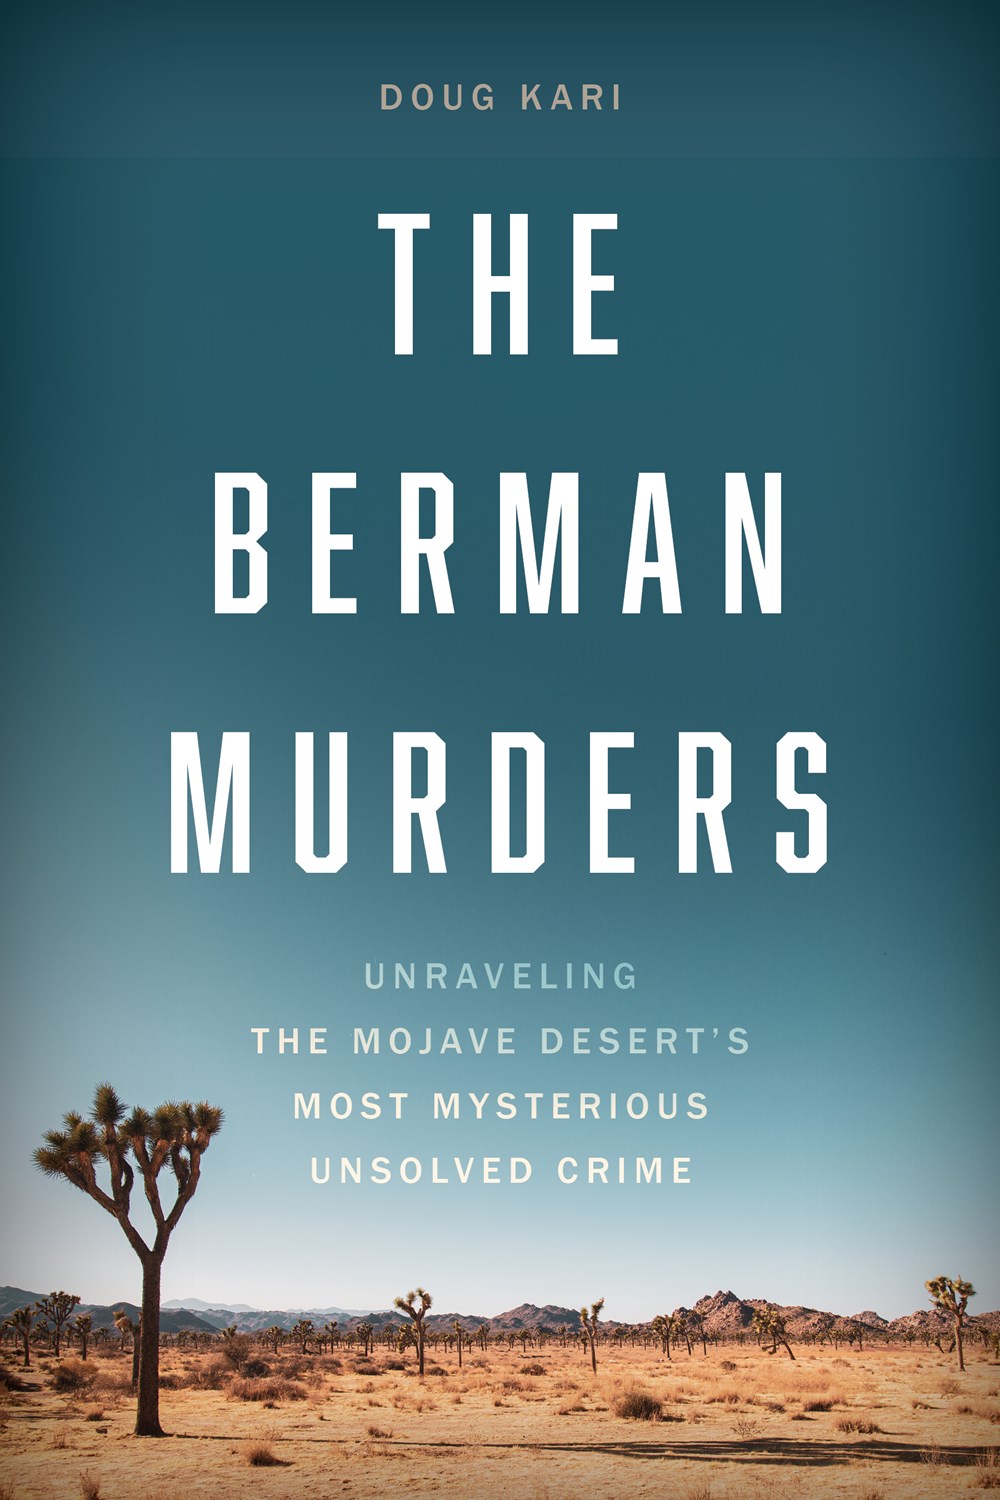 The Berman Murders: Unraveling the Mojave Desert’s Most Mysterious Unsolved Crime